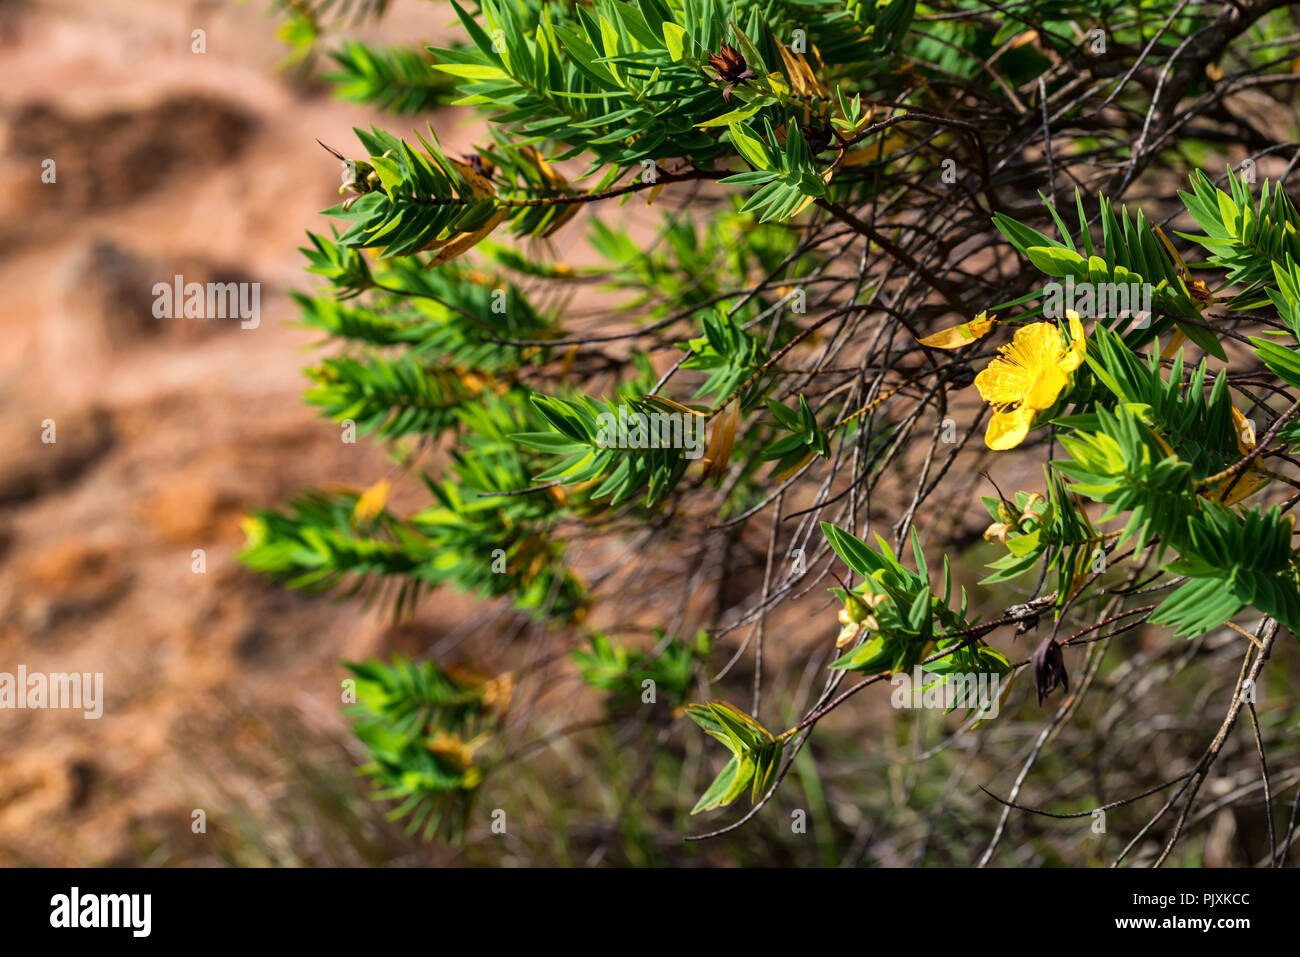 Green shrub of Genista with yellow flowers Stock Photo